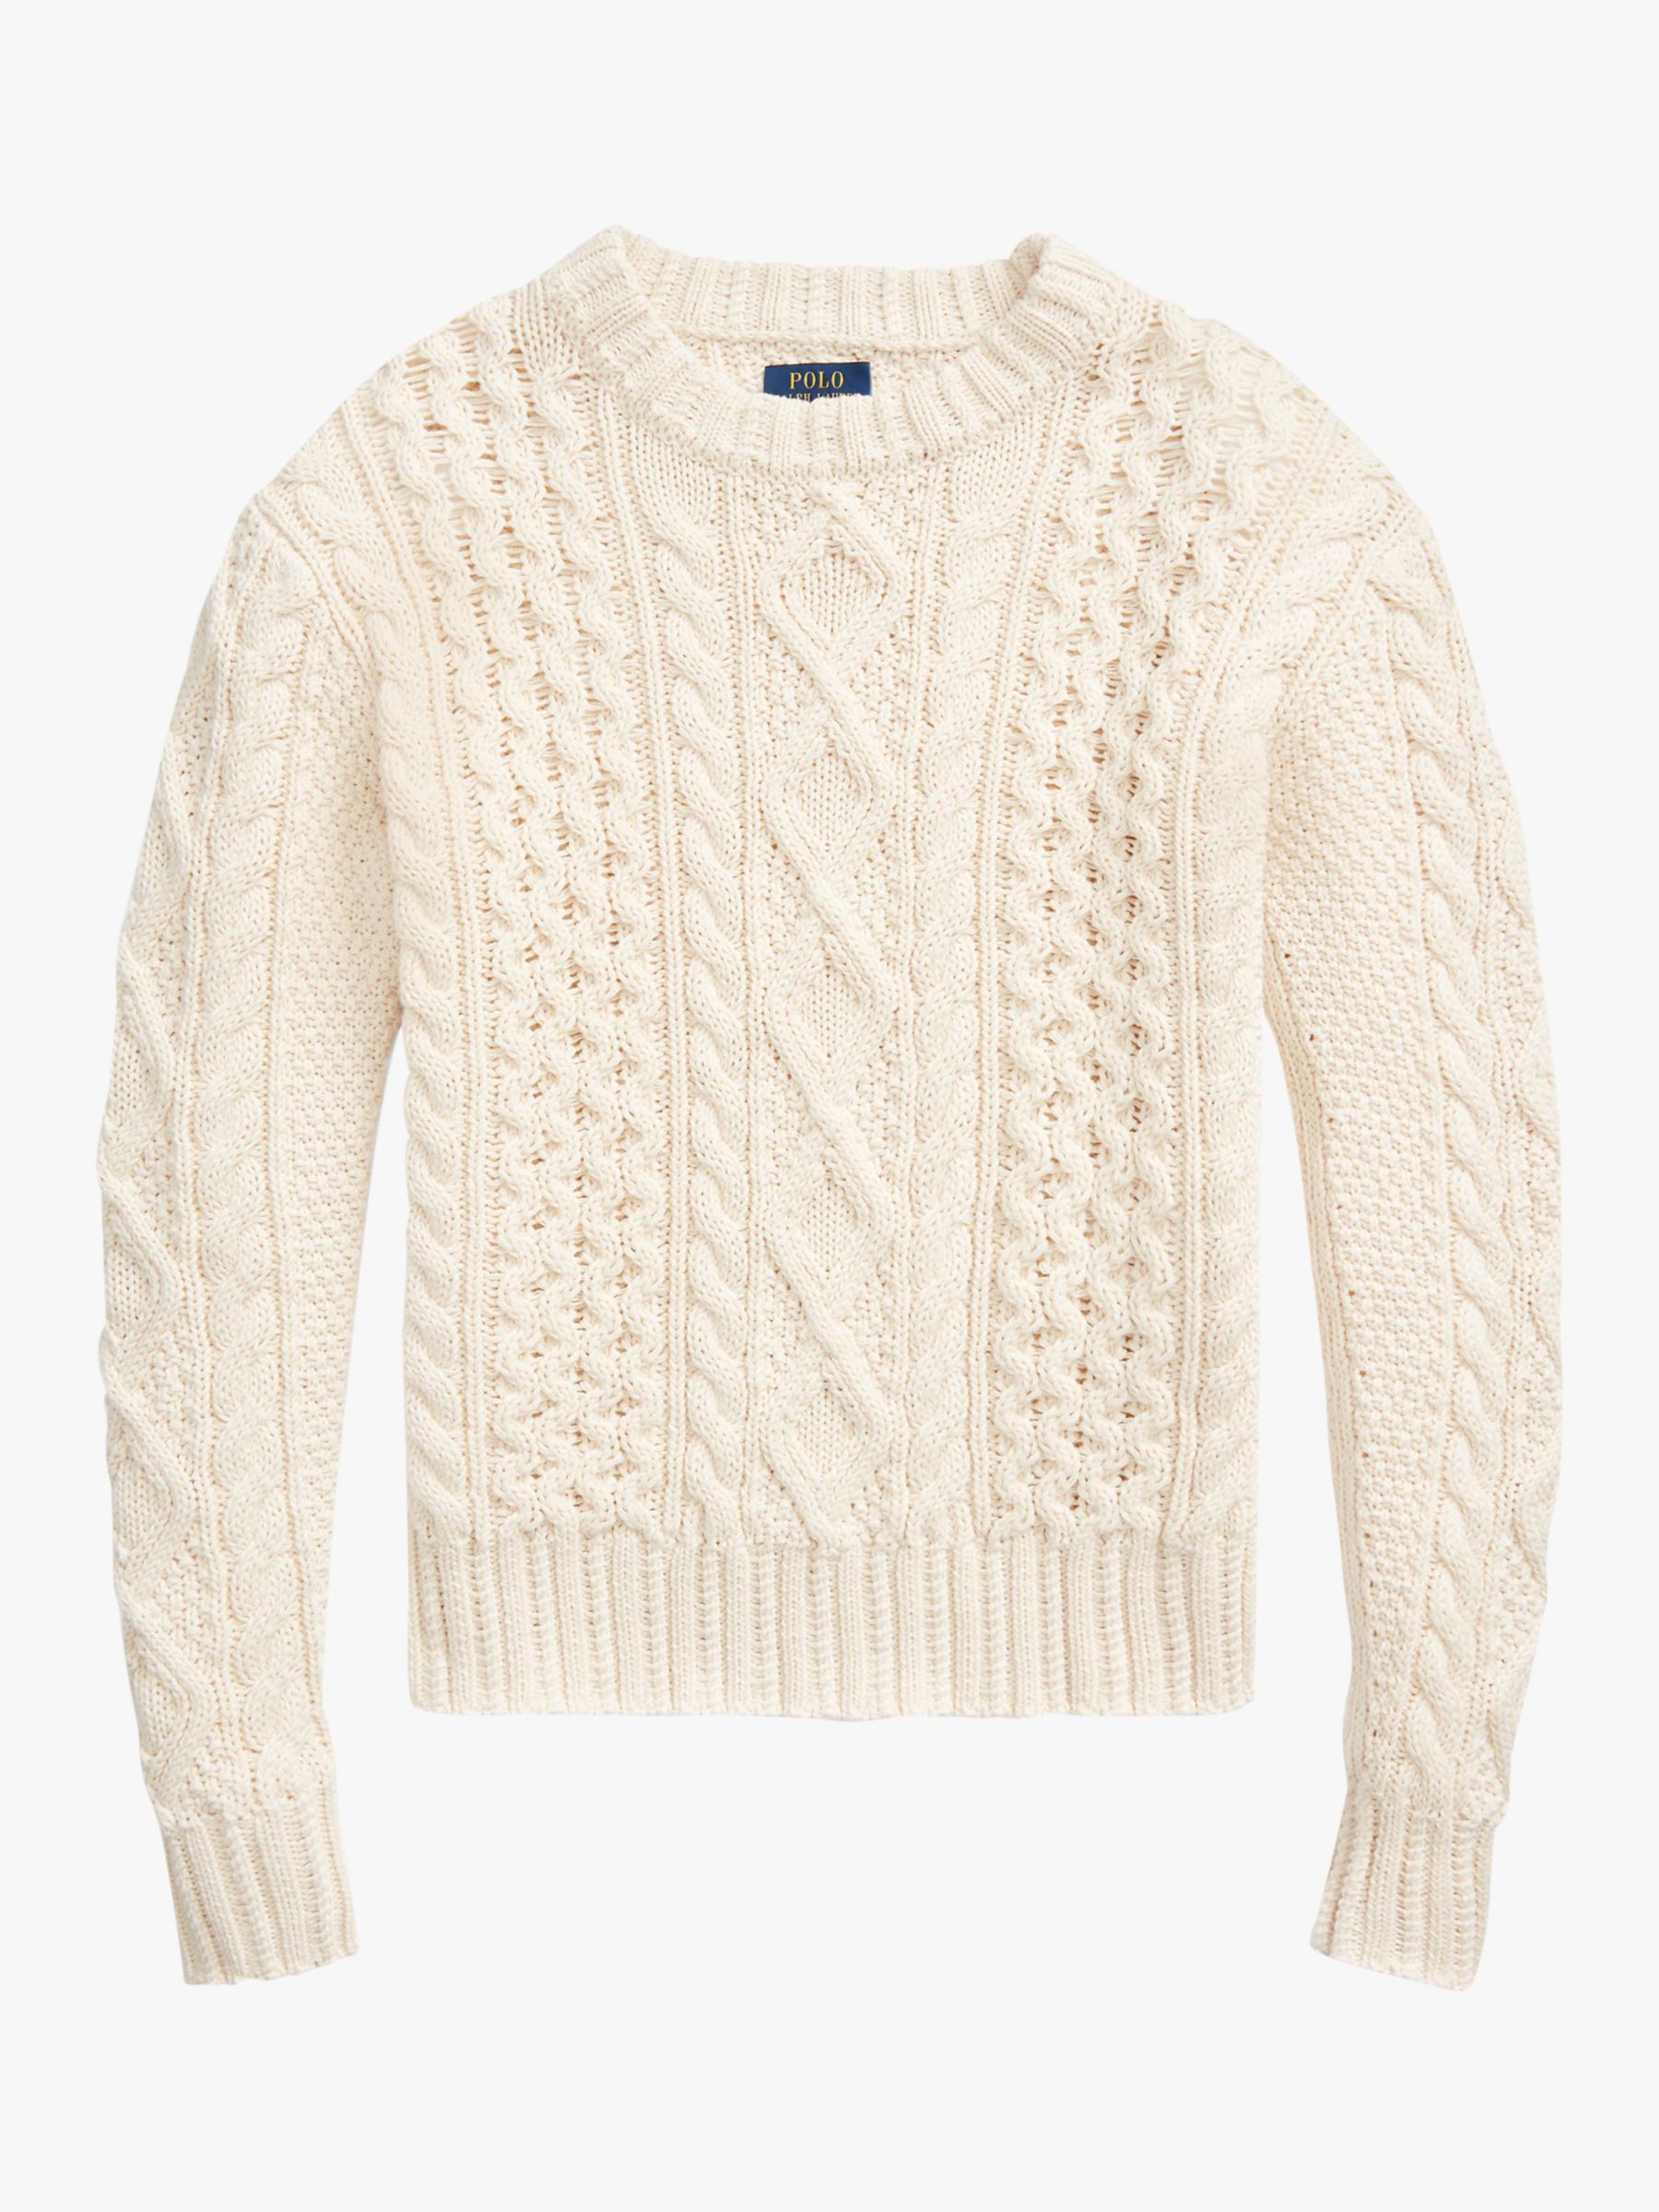 Polo Ralph Lauren Boxy Cable Knit Jumper, Cream at John Lewis & Partners